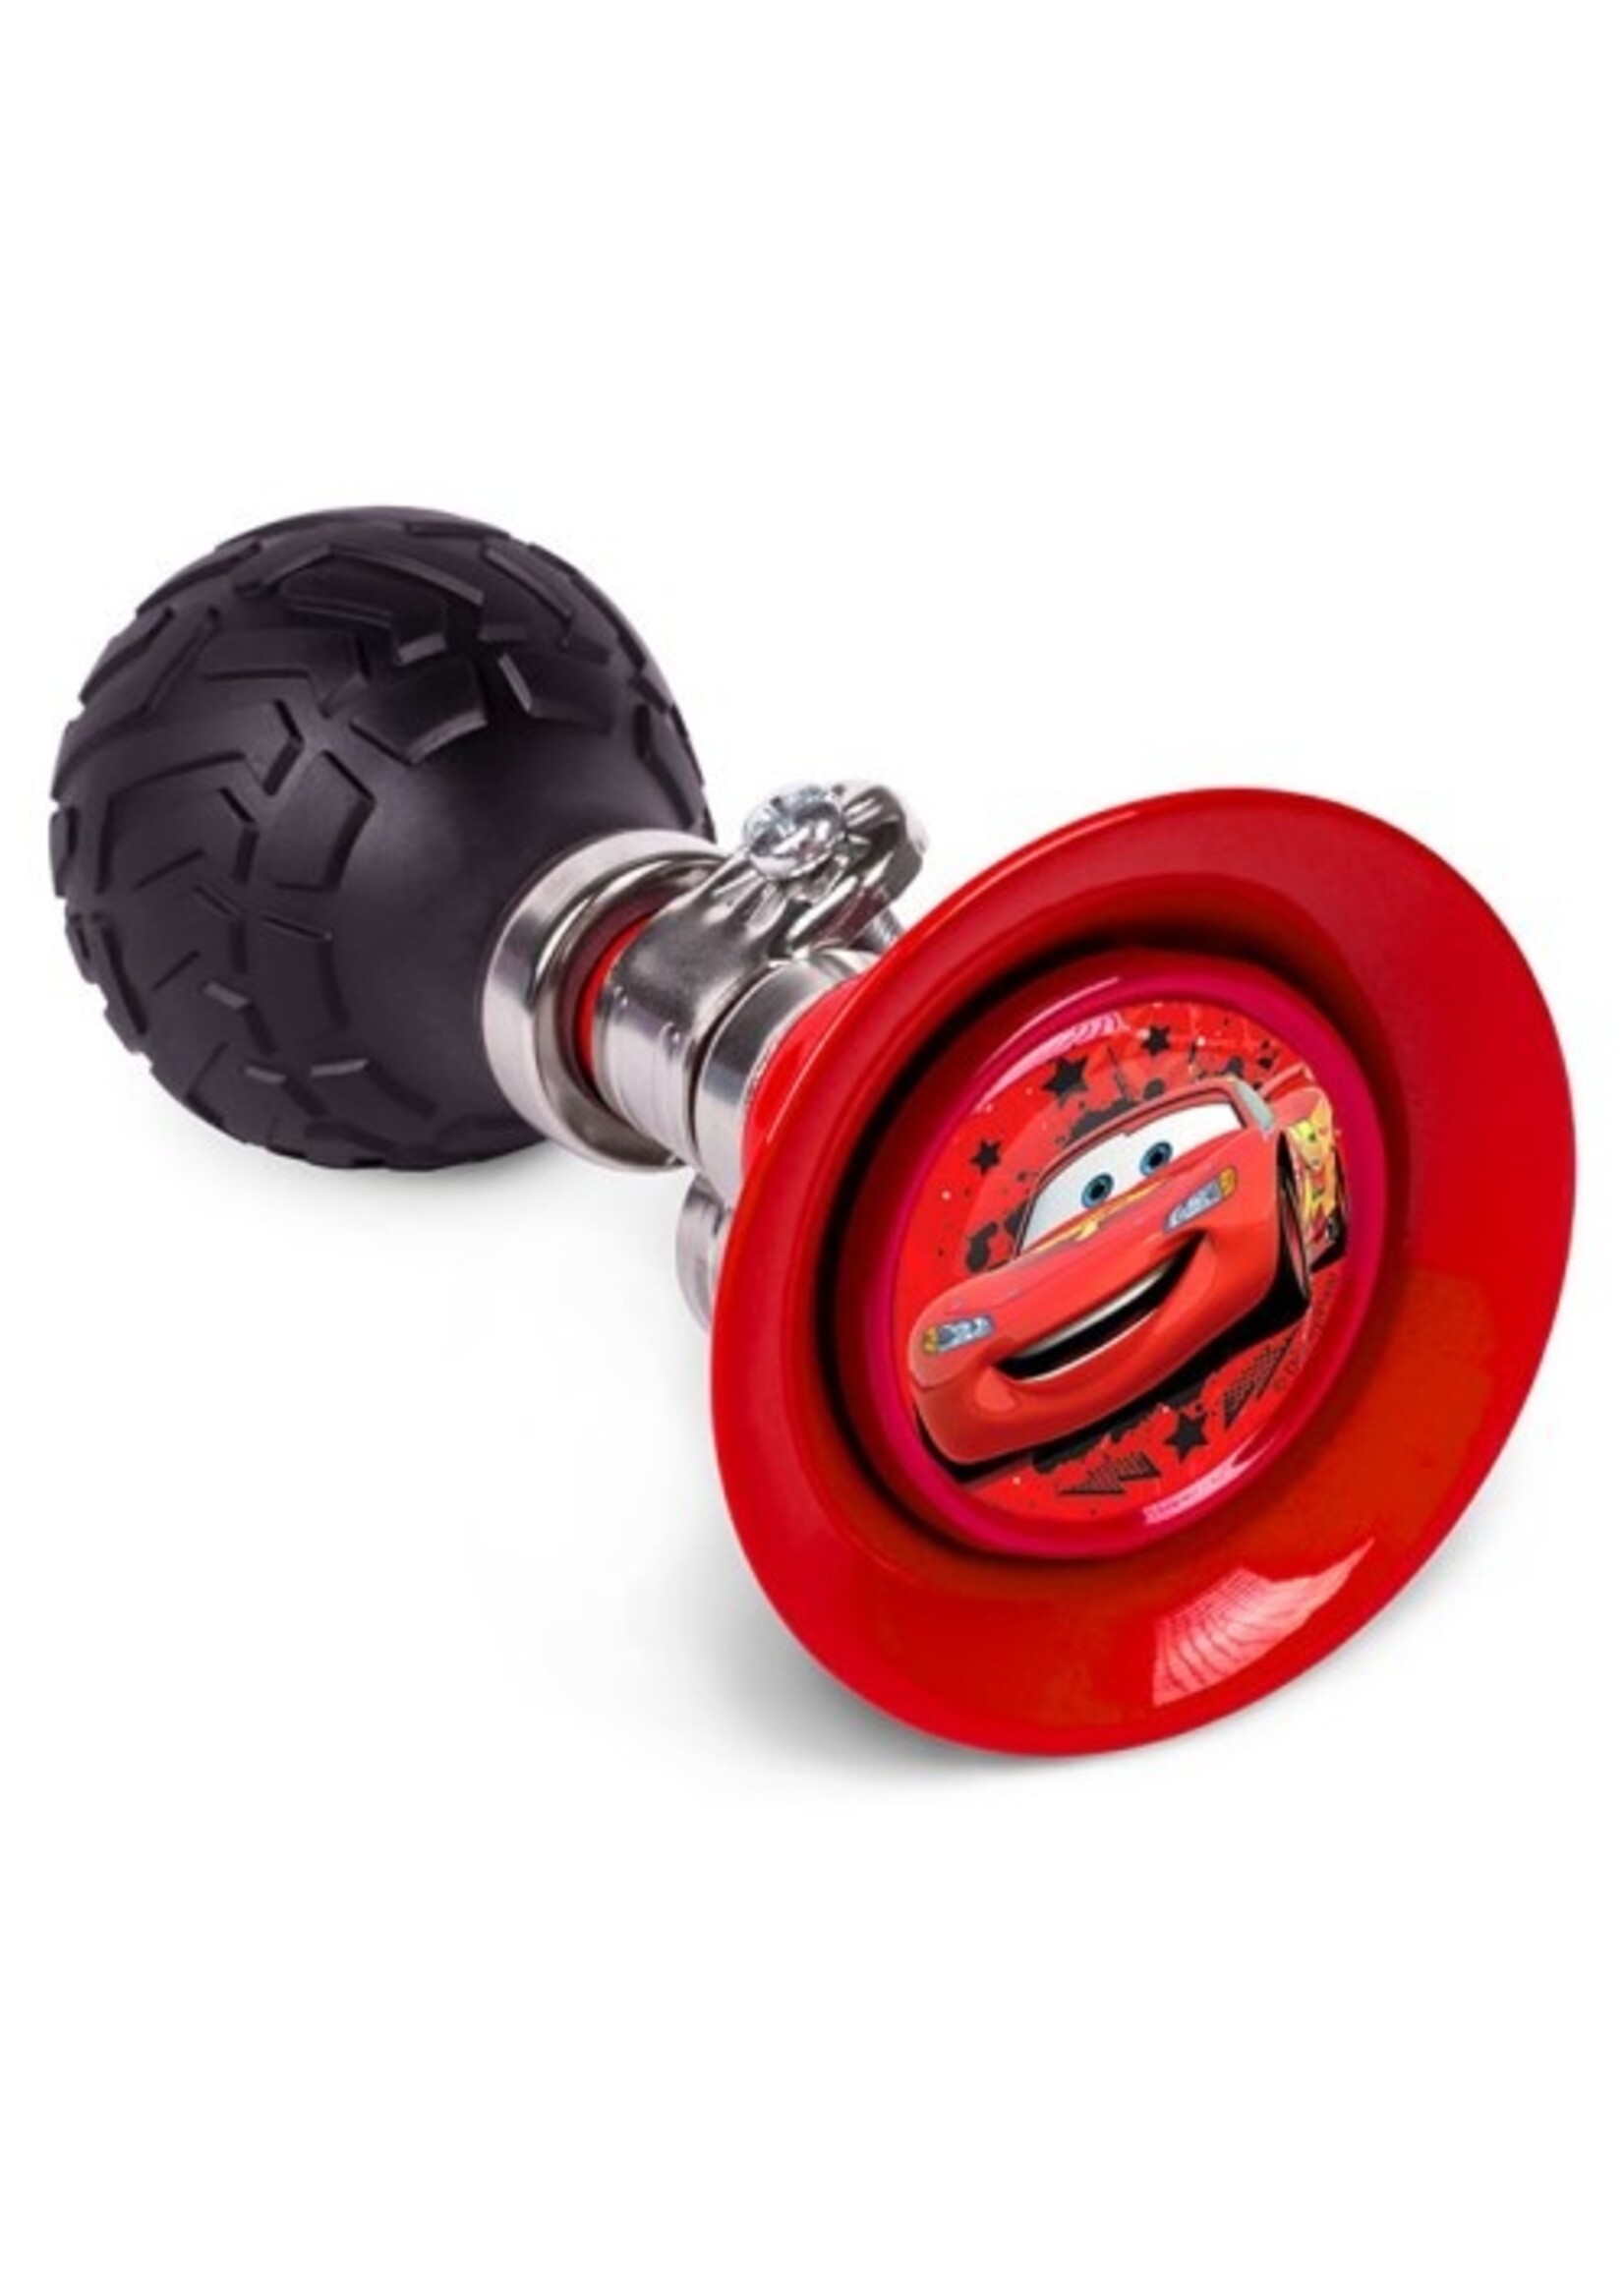 Disney Cars bicycle horn from Disney red